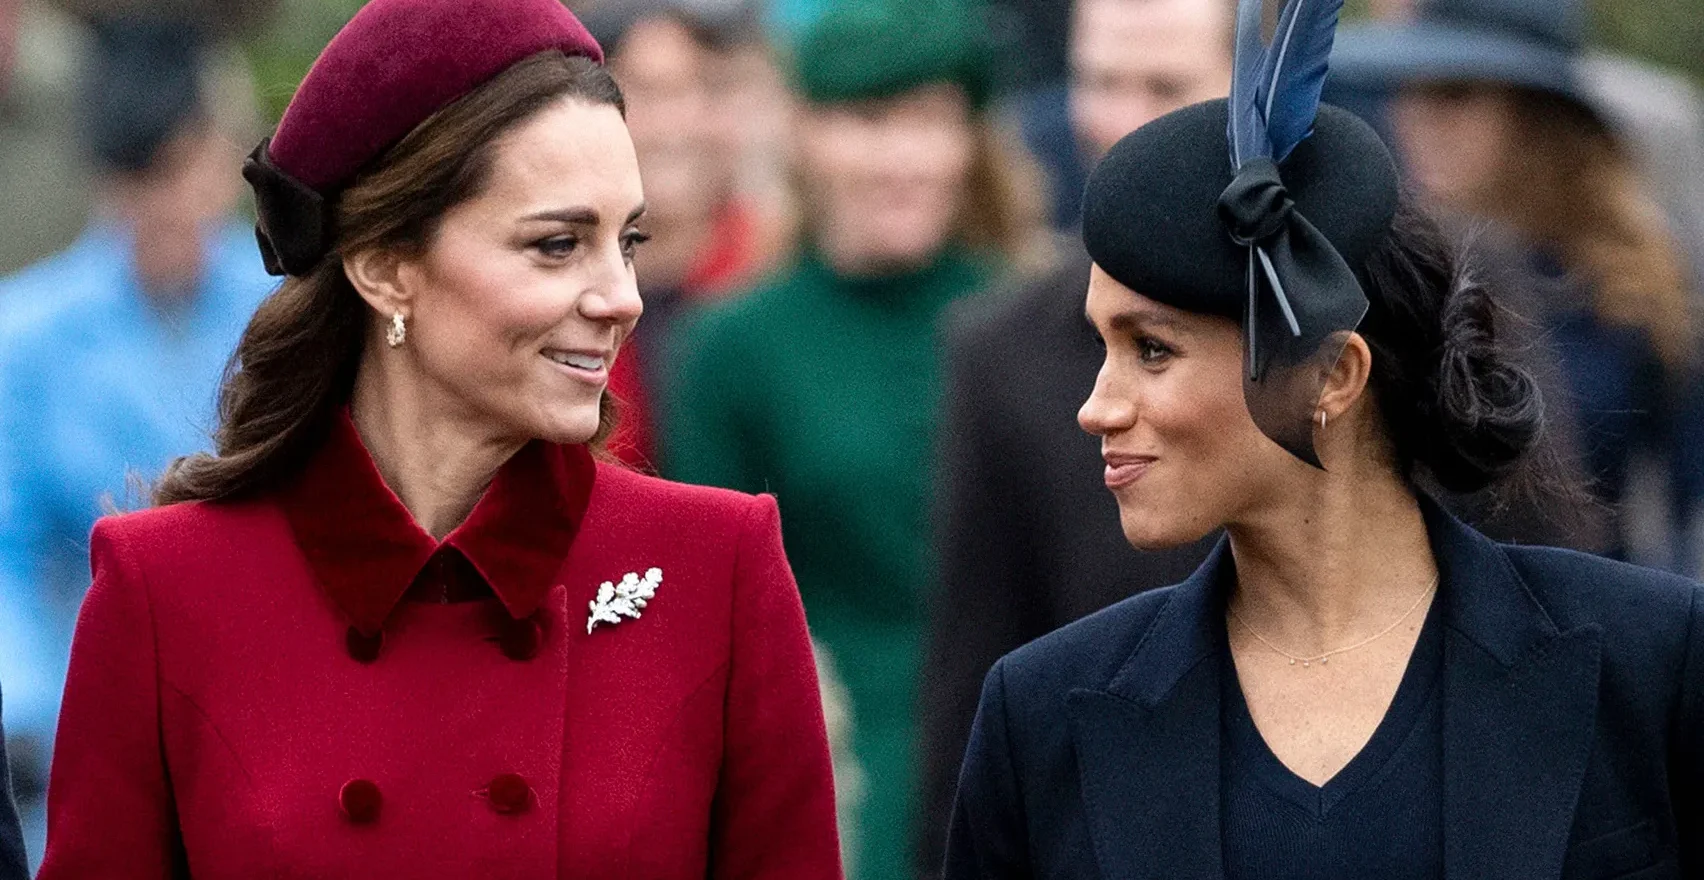 "Breaking royal protocol with grace and empathy, Meghan Markle, the Royal Princess, recently dialed up Princess Kate to check in on her well-being. Leading by example, Meghan's thoughtful gesture sets a shining standard for all. #RoyalsUnited"